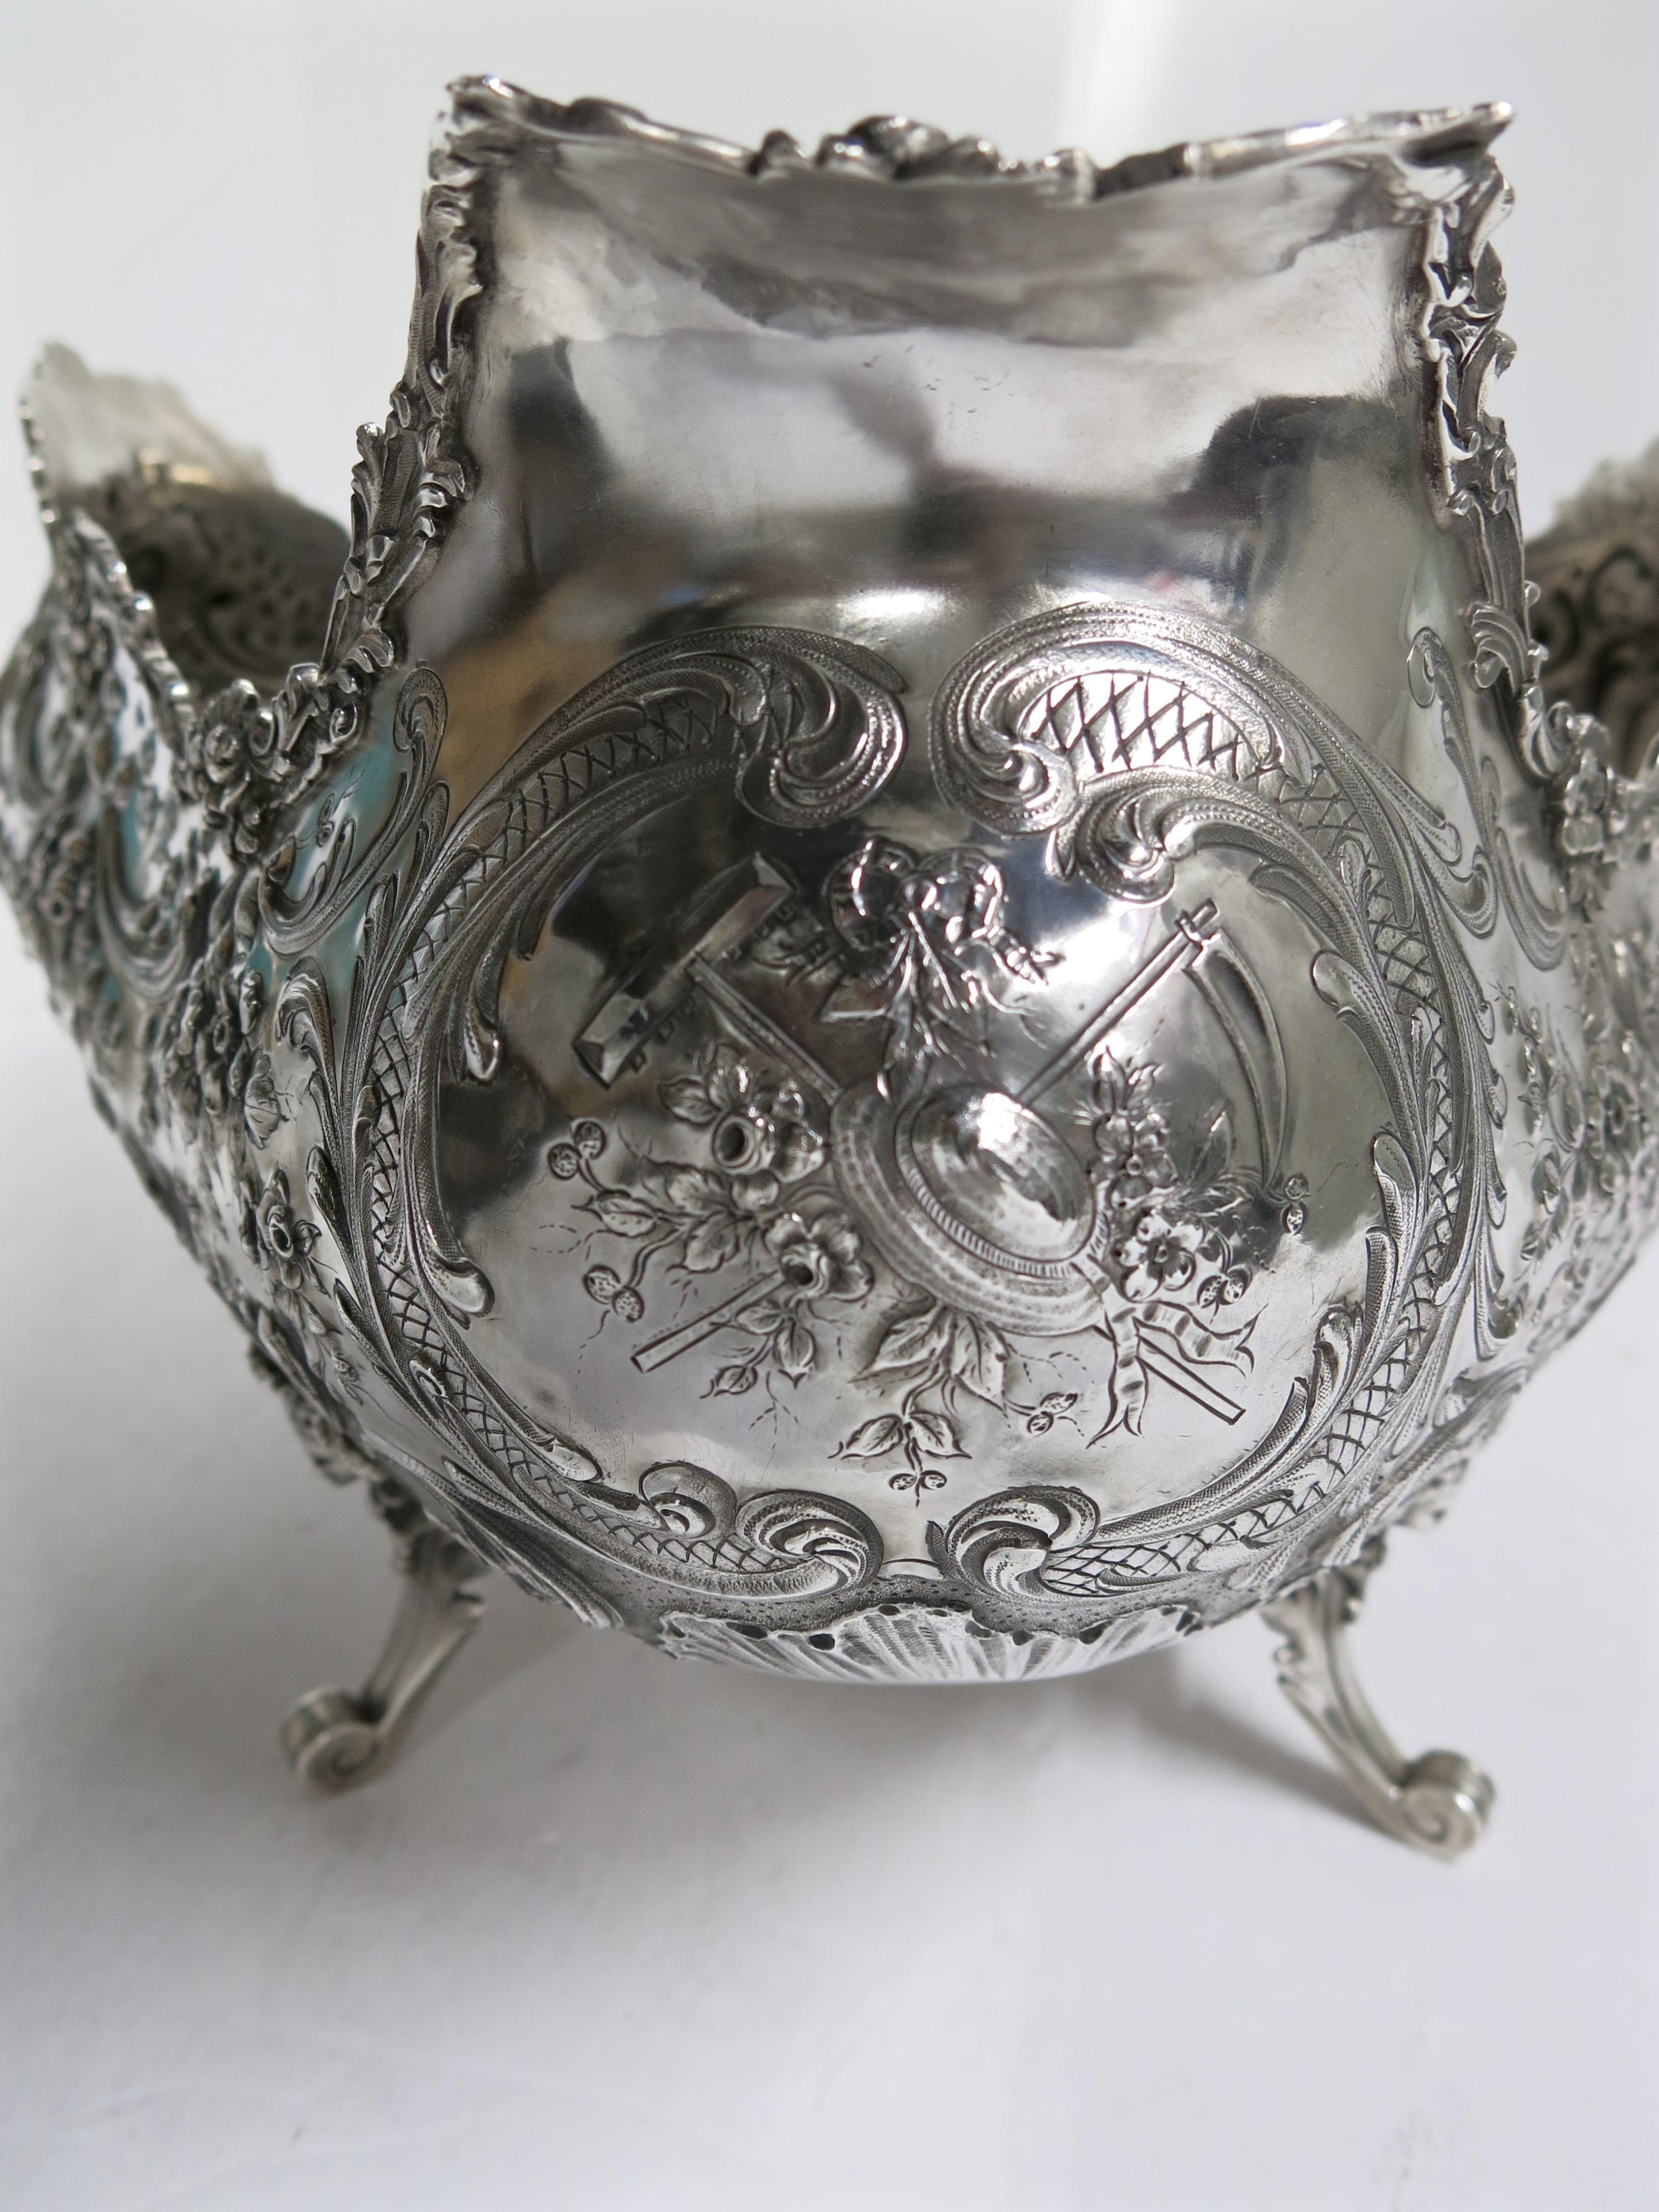 19th Century Stunning and Decorative, Large Oval Sterling Silver Antique French Centerpiece